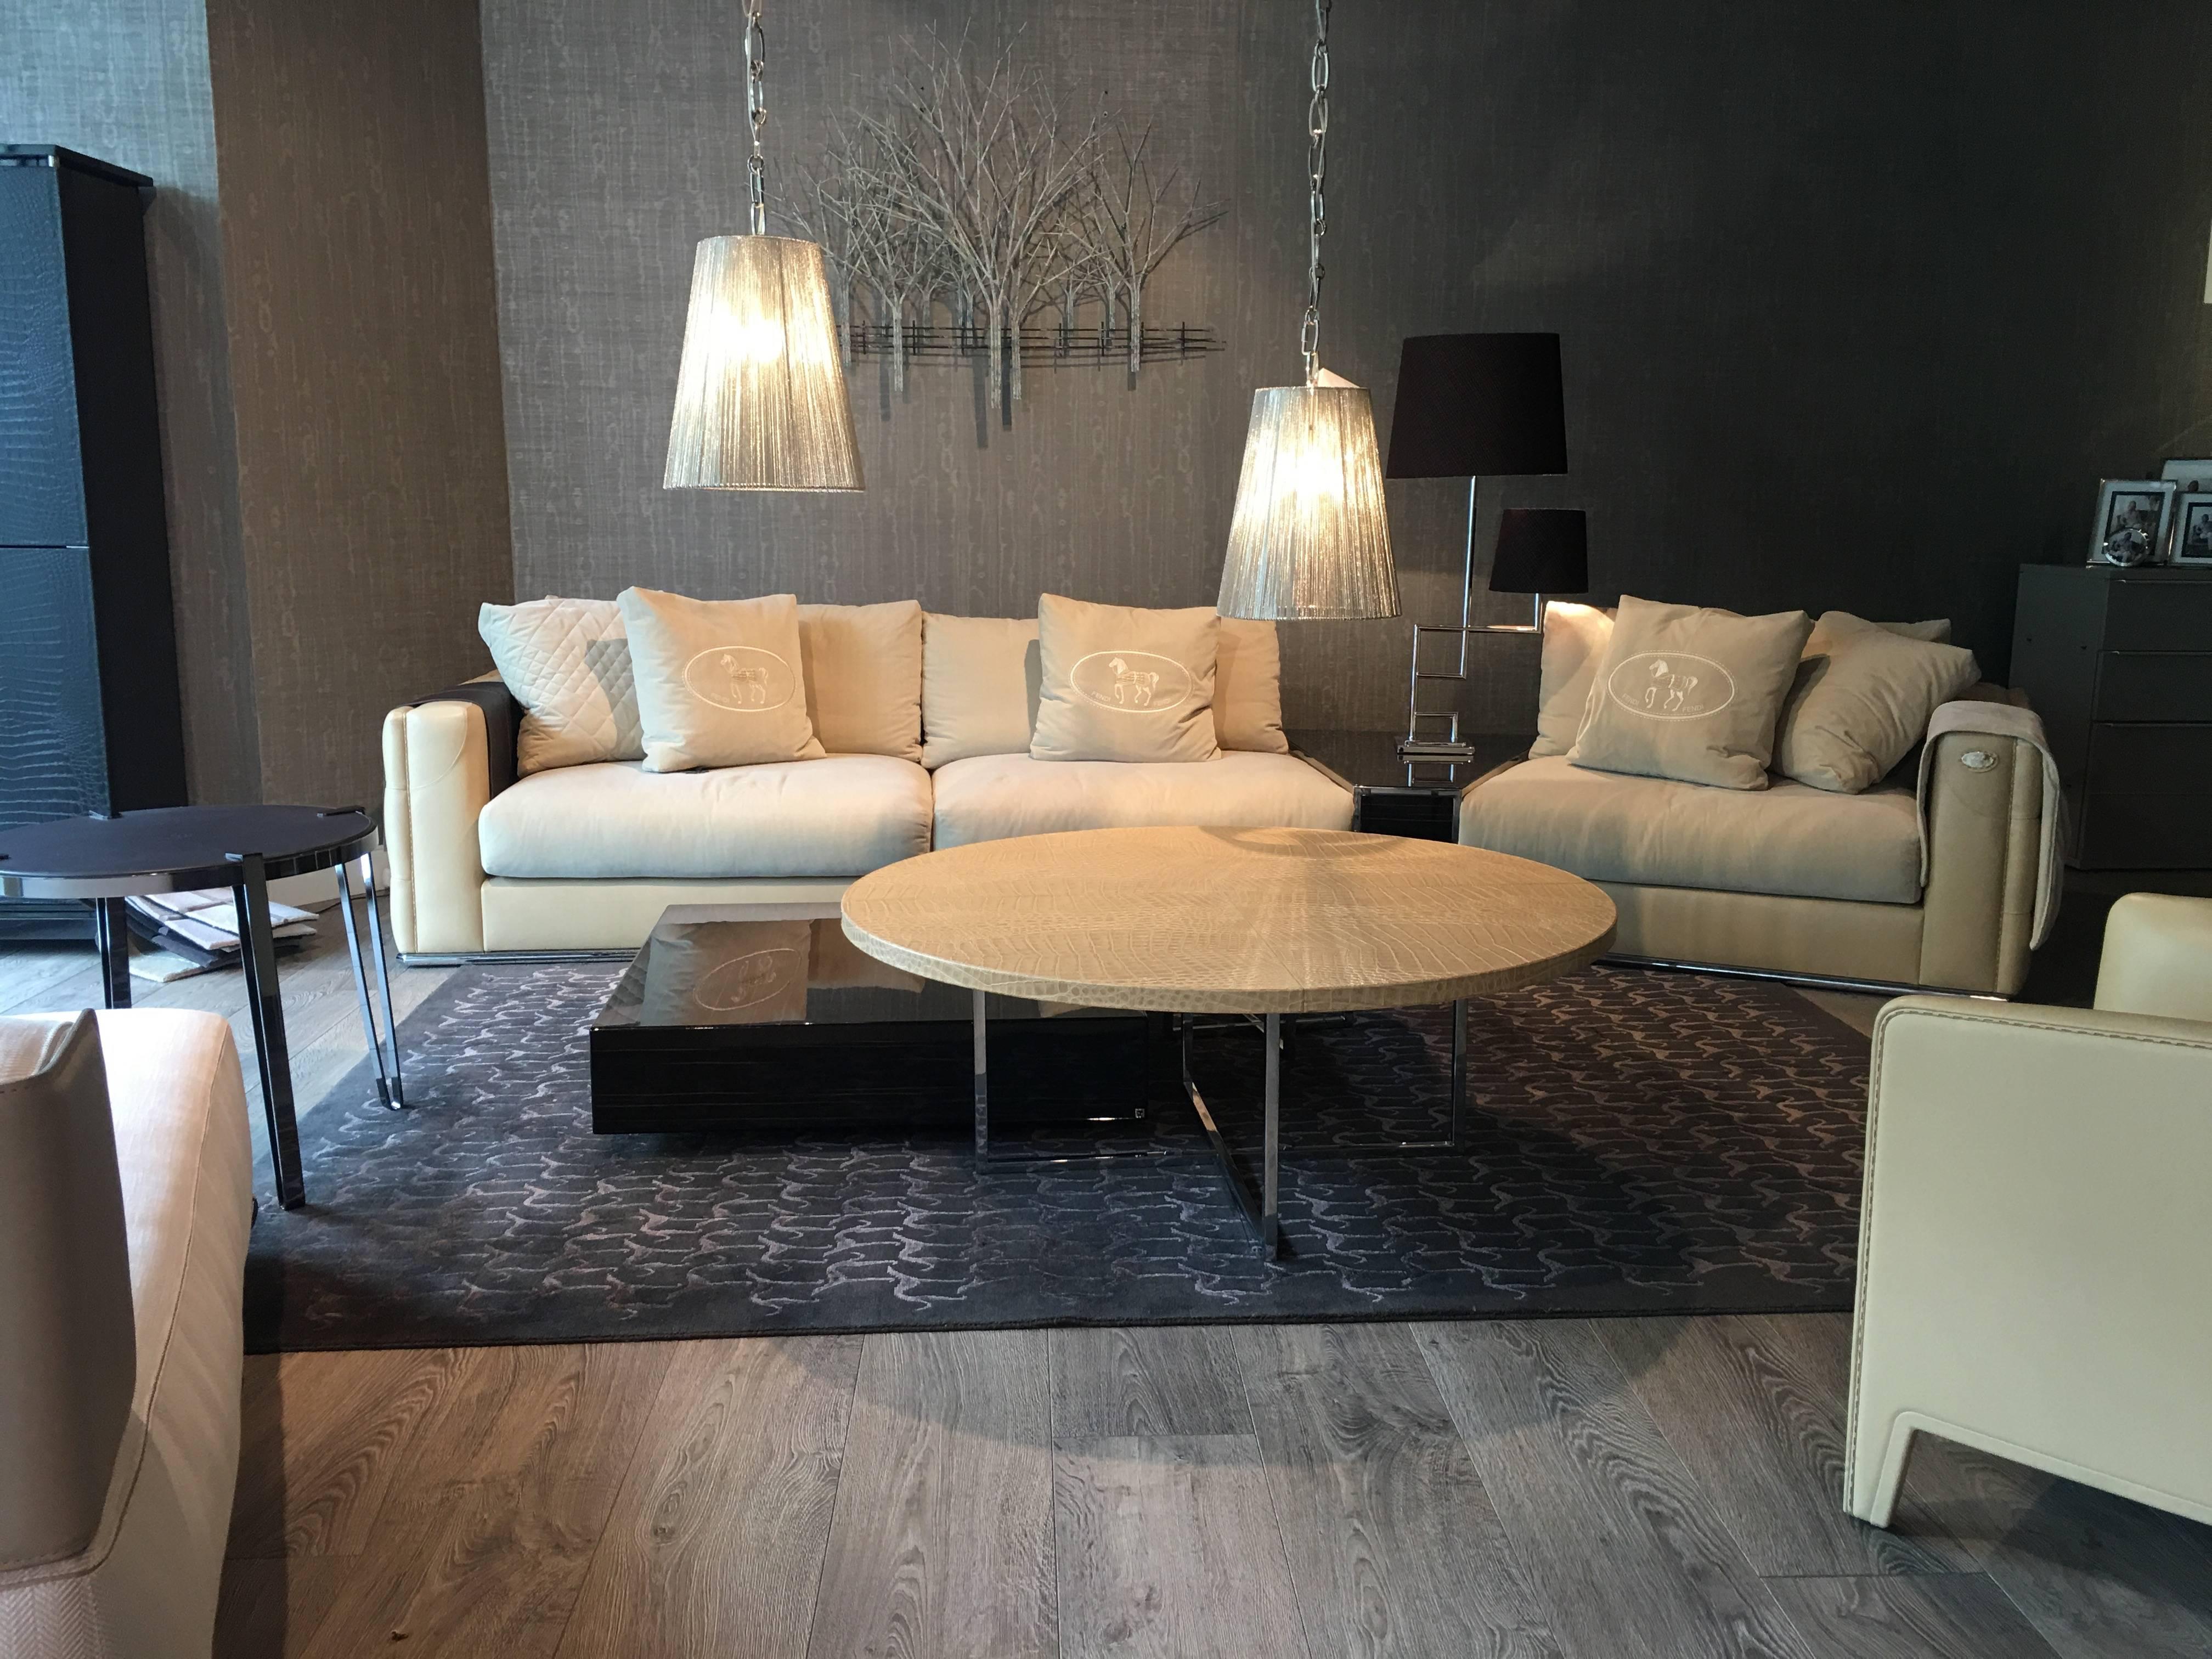 We are delighted to present to you the amazing curved sofa "Plaza", designed and manufactured by Fendi Casa (label of the Luxury Living Group) in Italy, that provides timeless design and highest quality for our exclusive clients. The